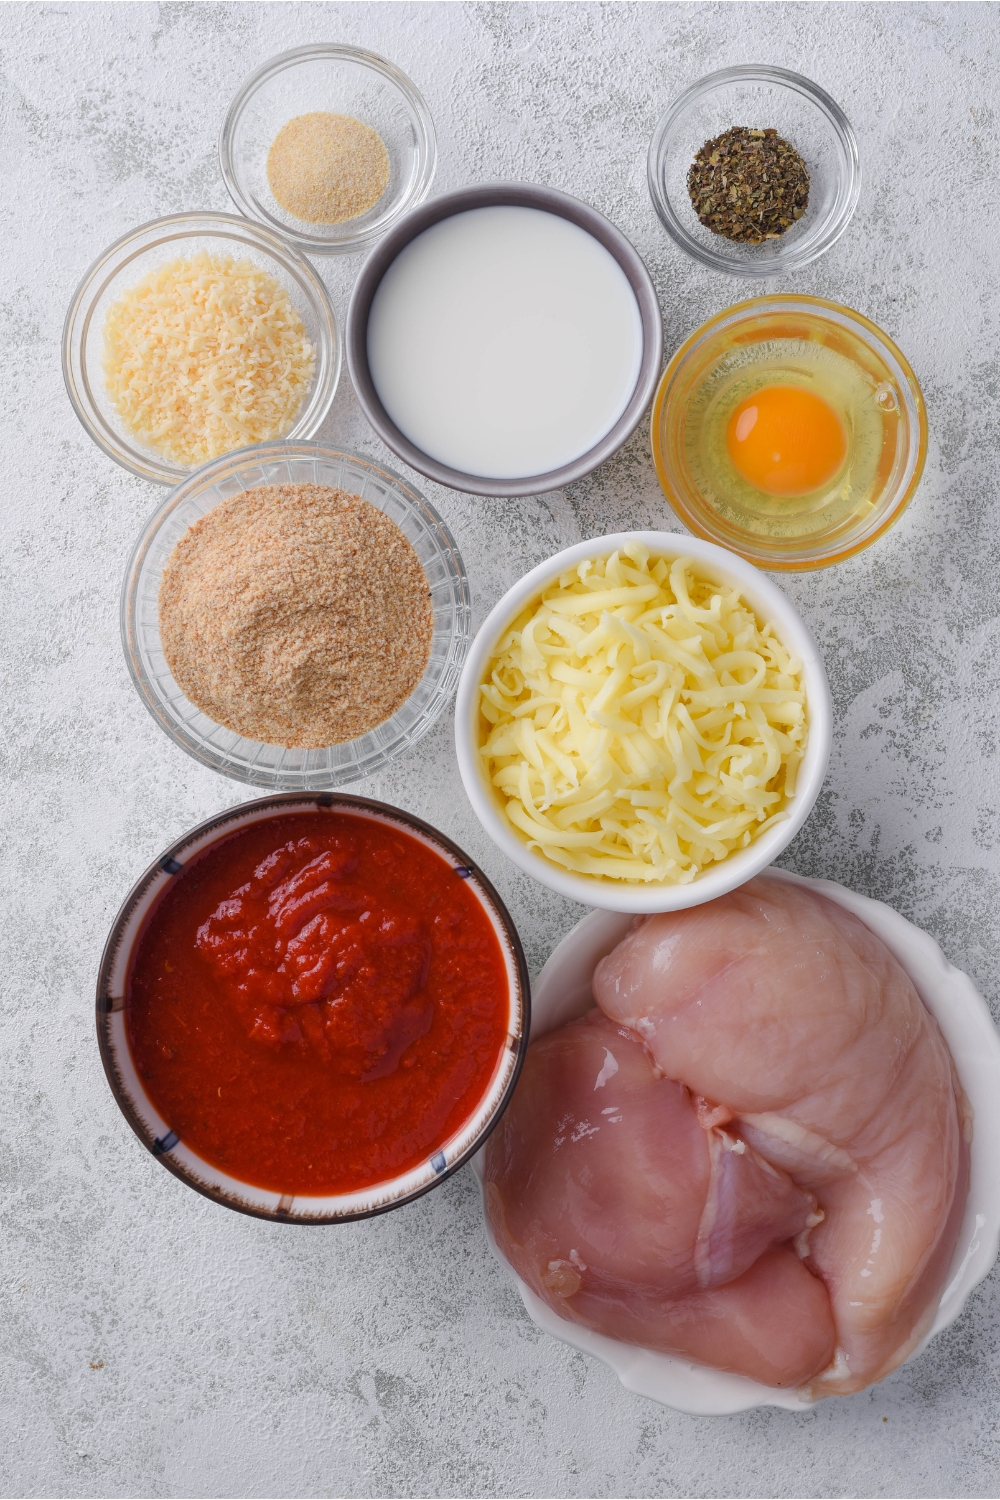 Overhead view of an assortment of ingredients including bowls of raw chicken breasts, marinara sauce, shredded cheese, an egg, breadcrumbs, seasoning, and milk.